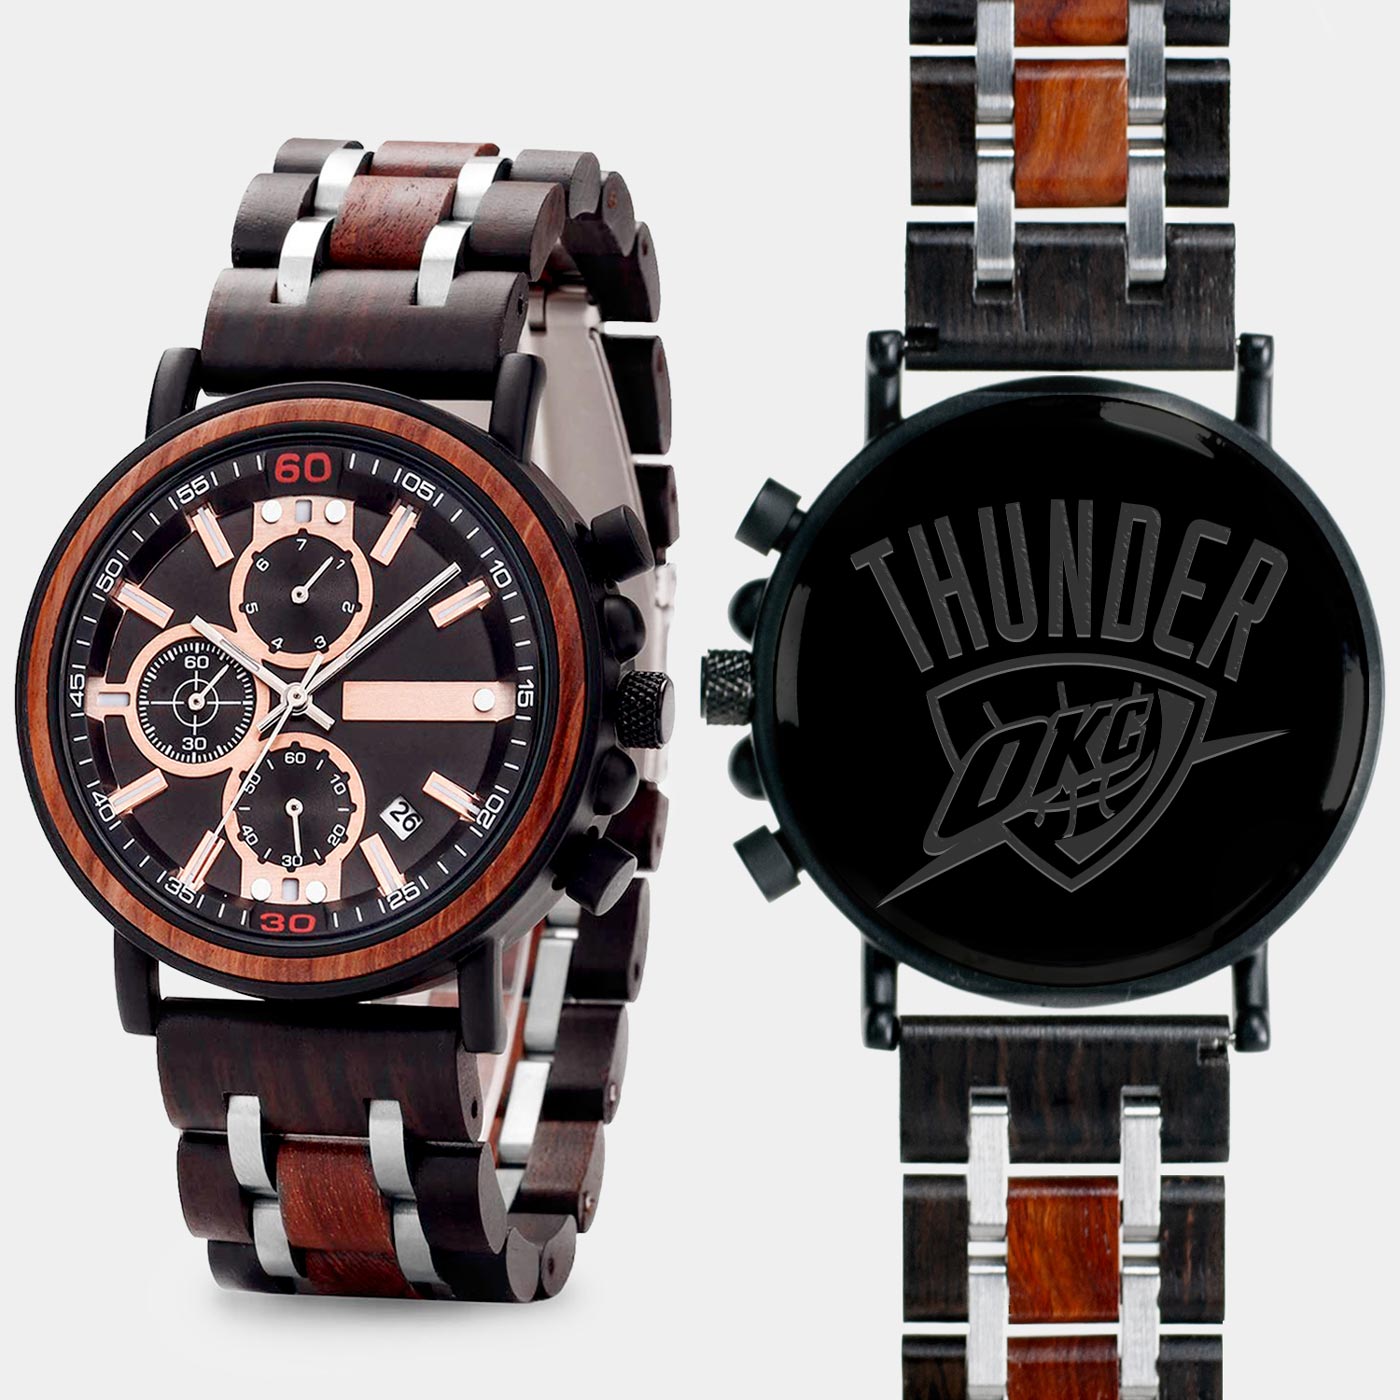 OKC Thunder Mens Wrist Watch  - Personalized OKC Thunder Mens Watches - Custom Gifts For Him, Birthday Gifts, Gift For Dad - Best 2022 OKC Thunder Christmas Gifts - Black 45mm NBA Wood Watch